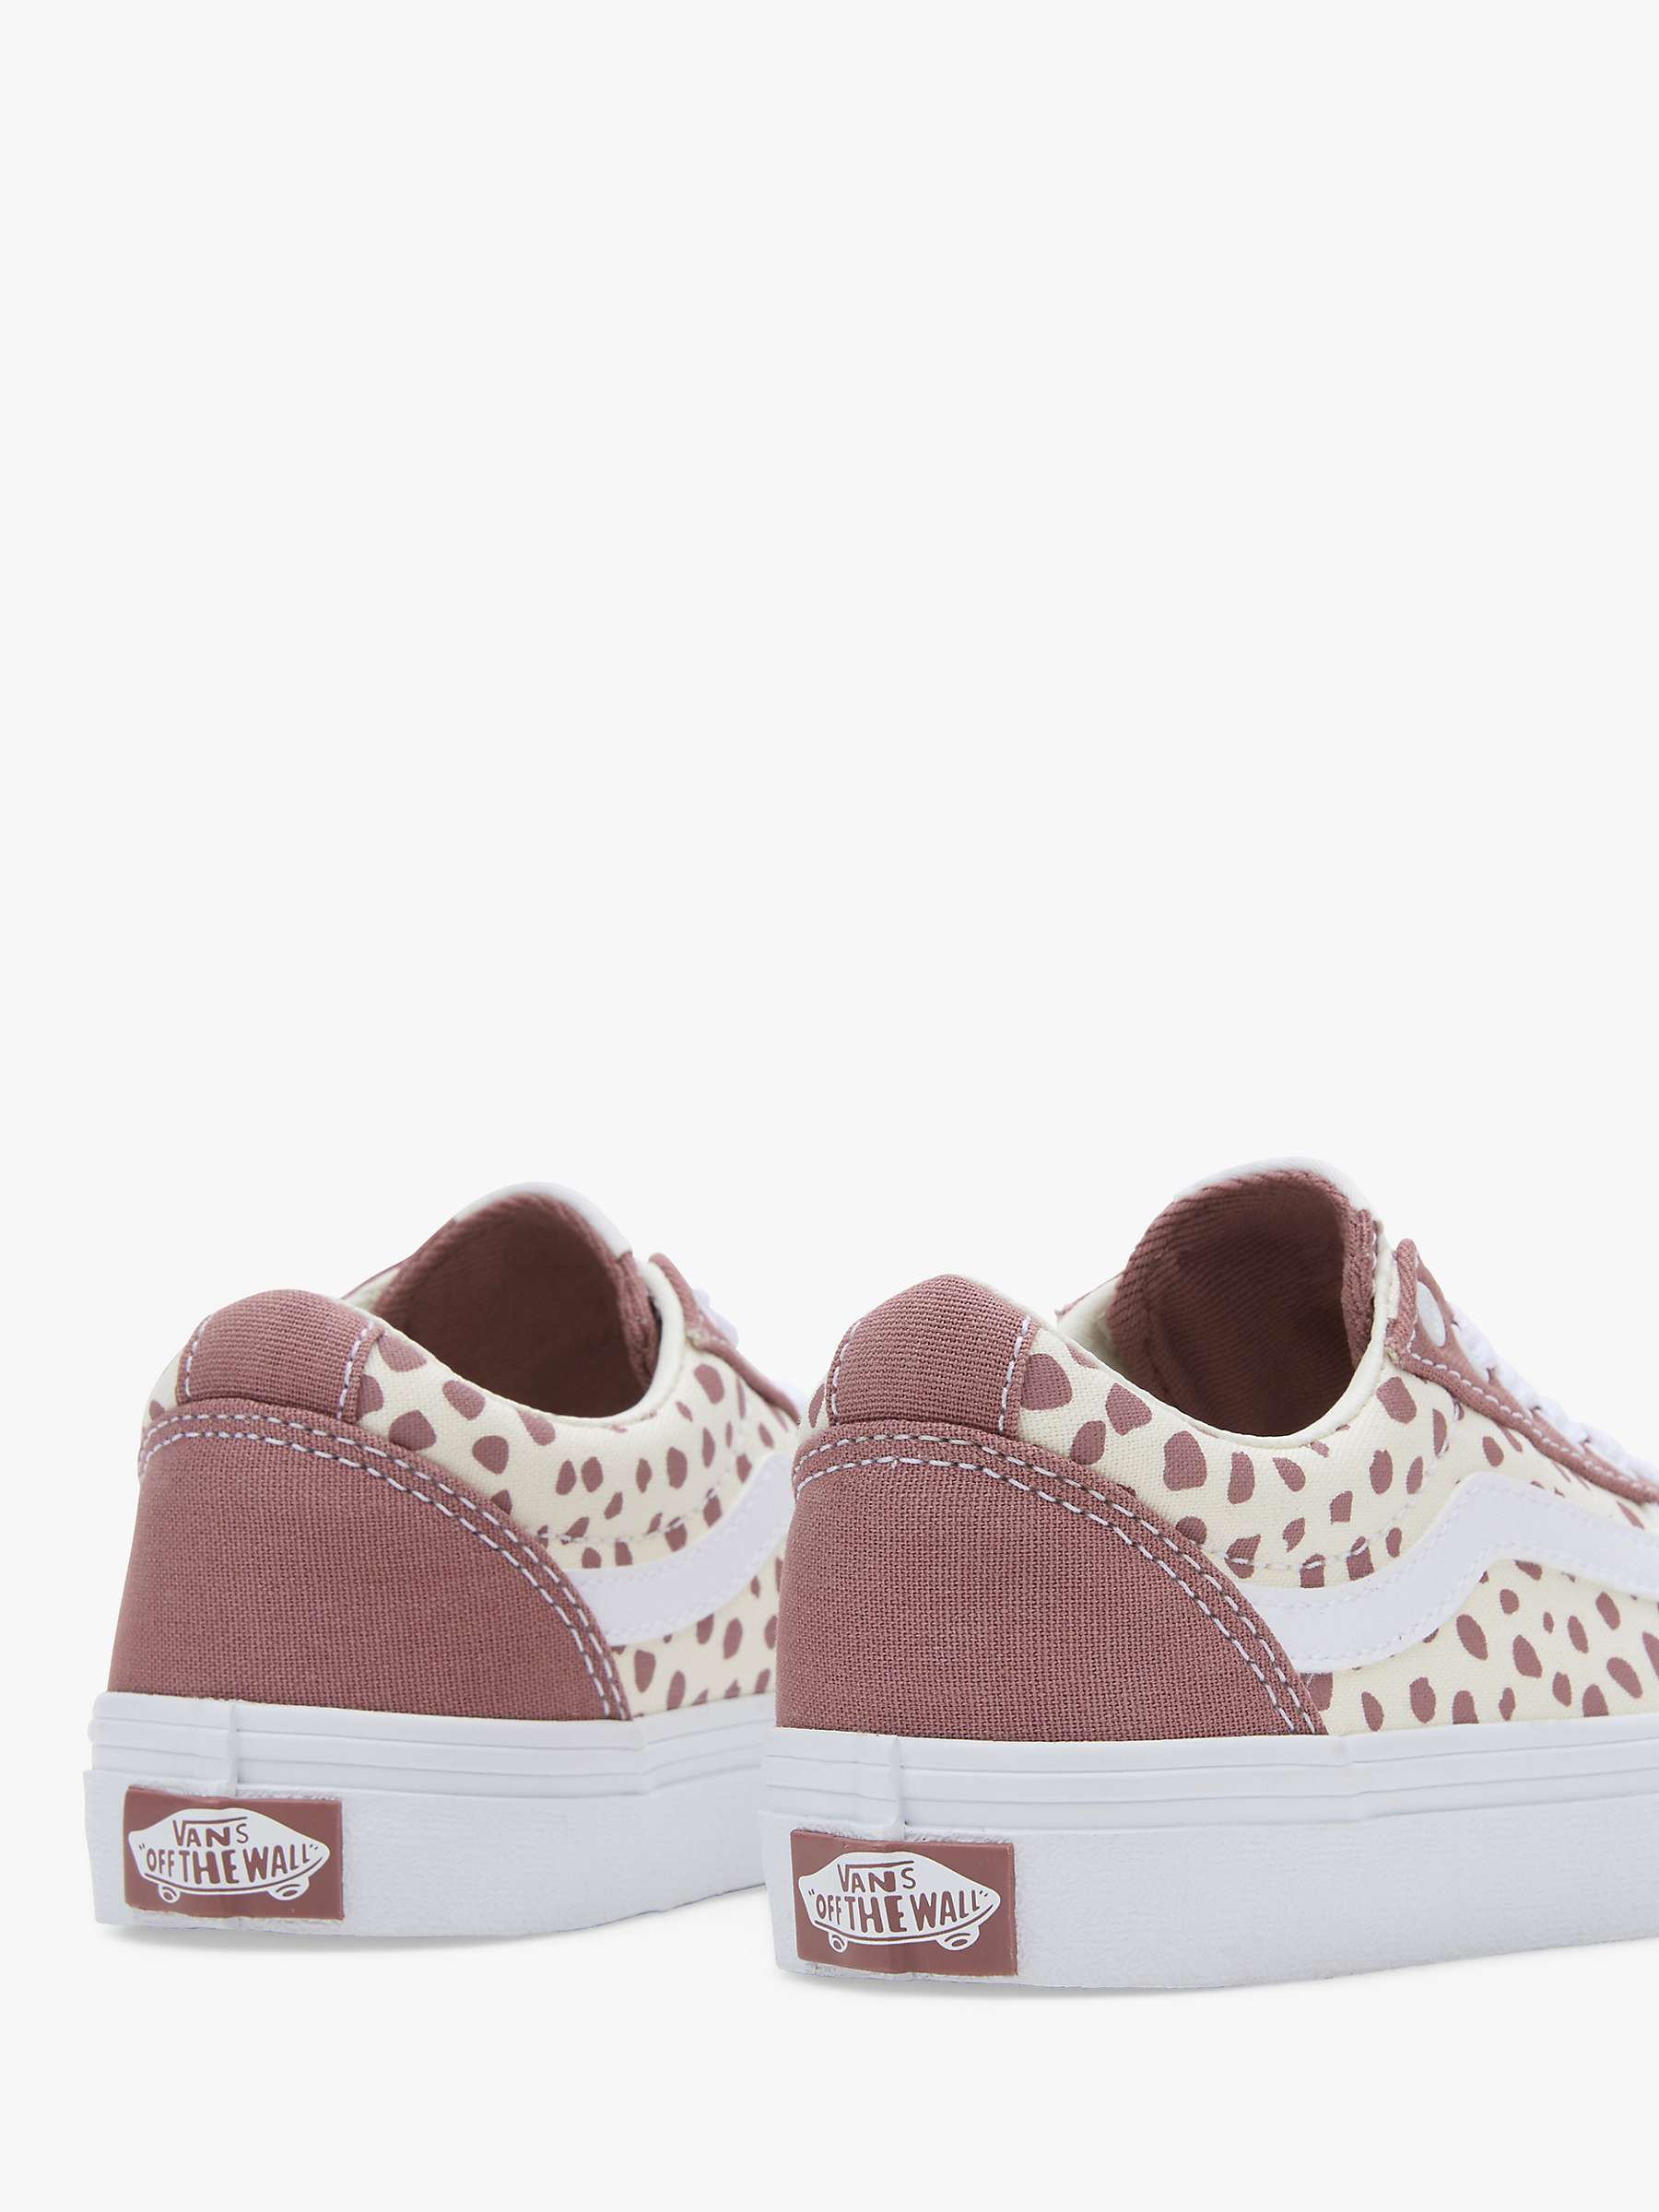 Buy Vans Kids' Ward Dots Trainers, Withered Rose Online at johnlewis.com